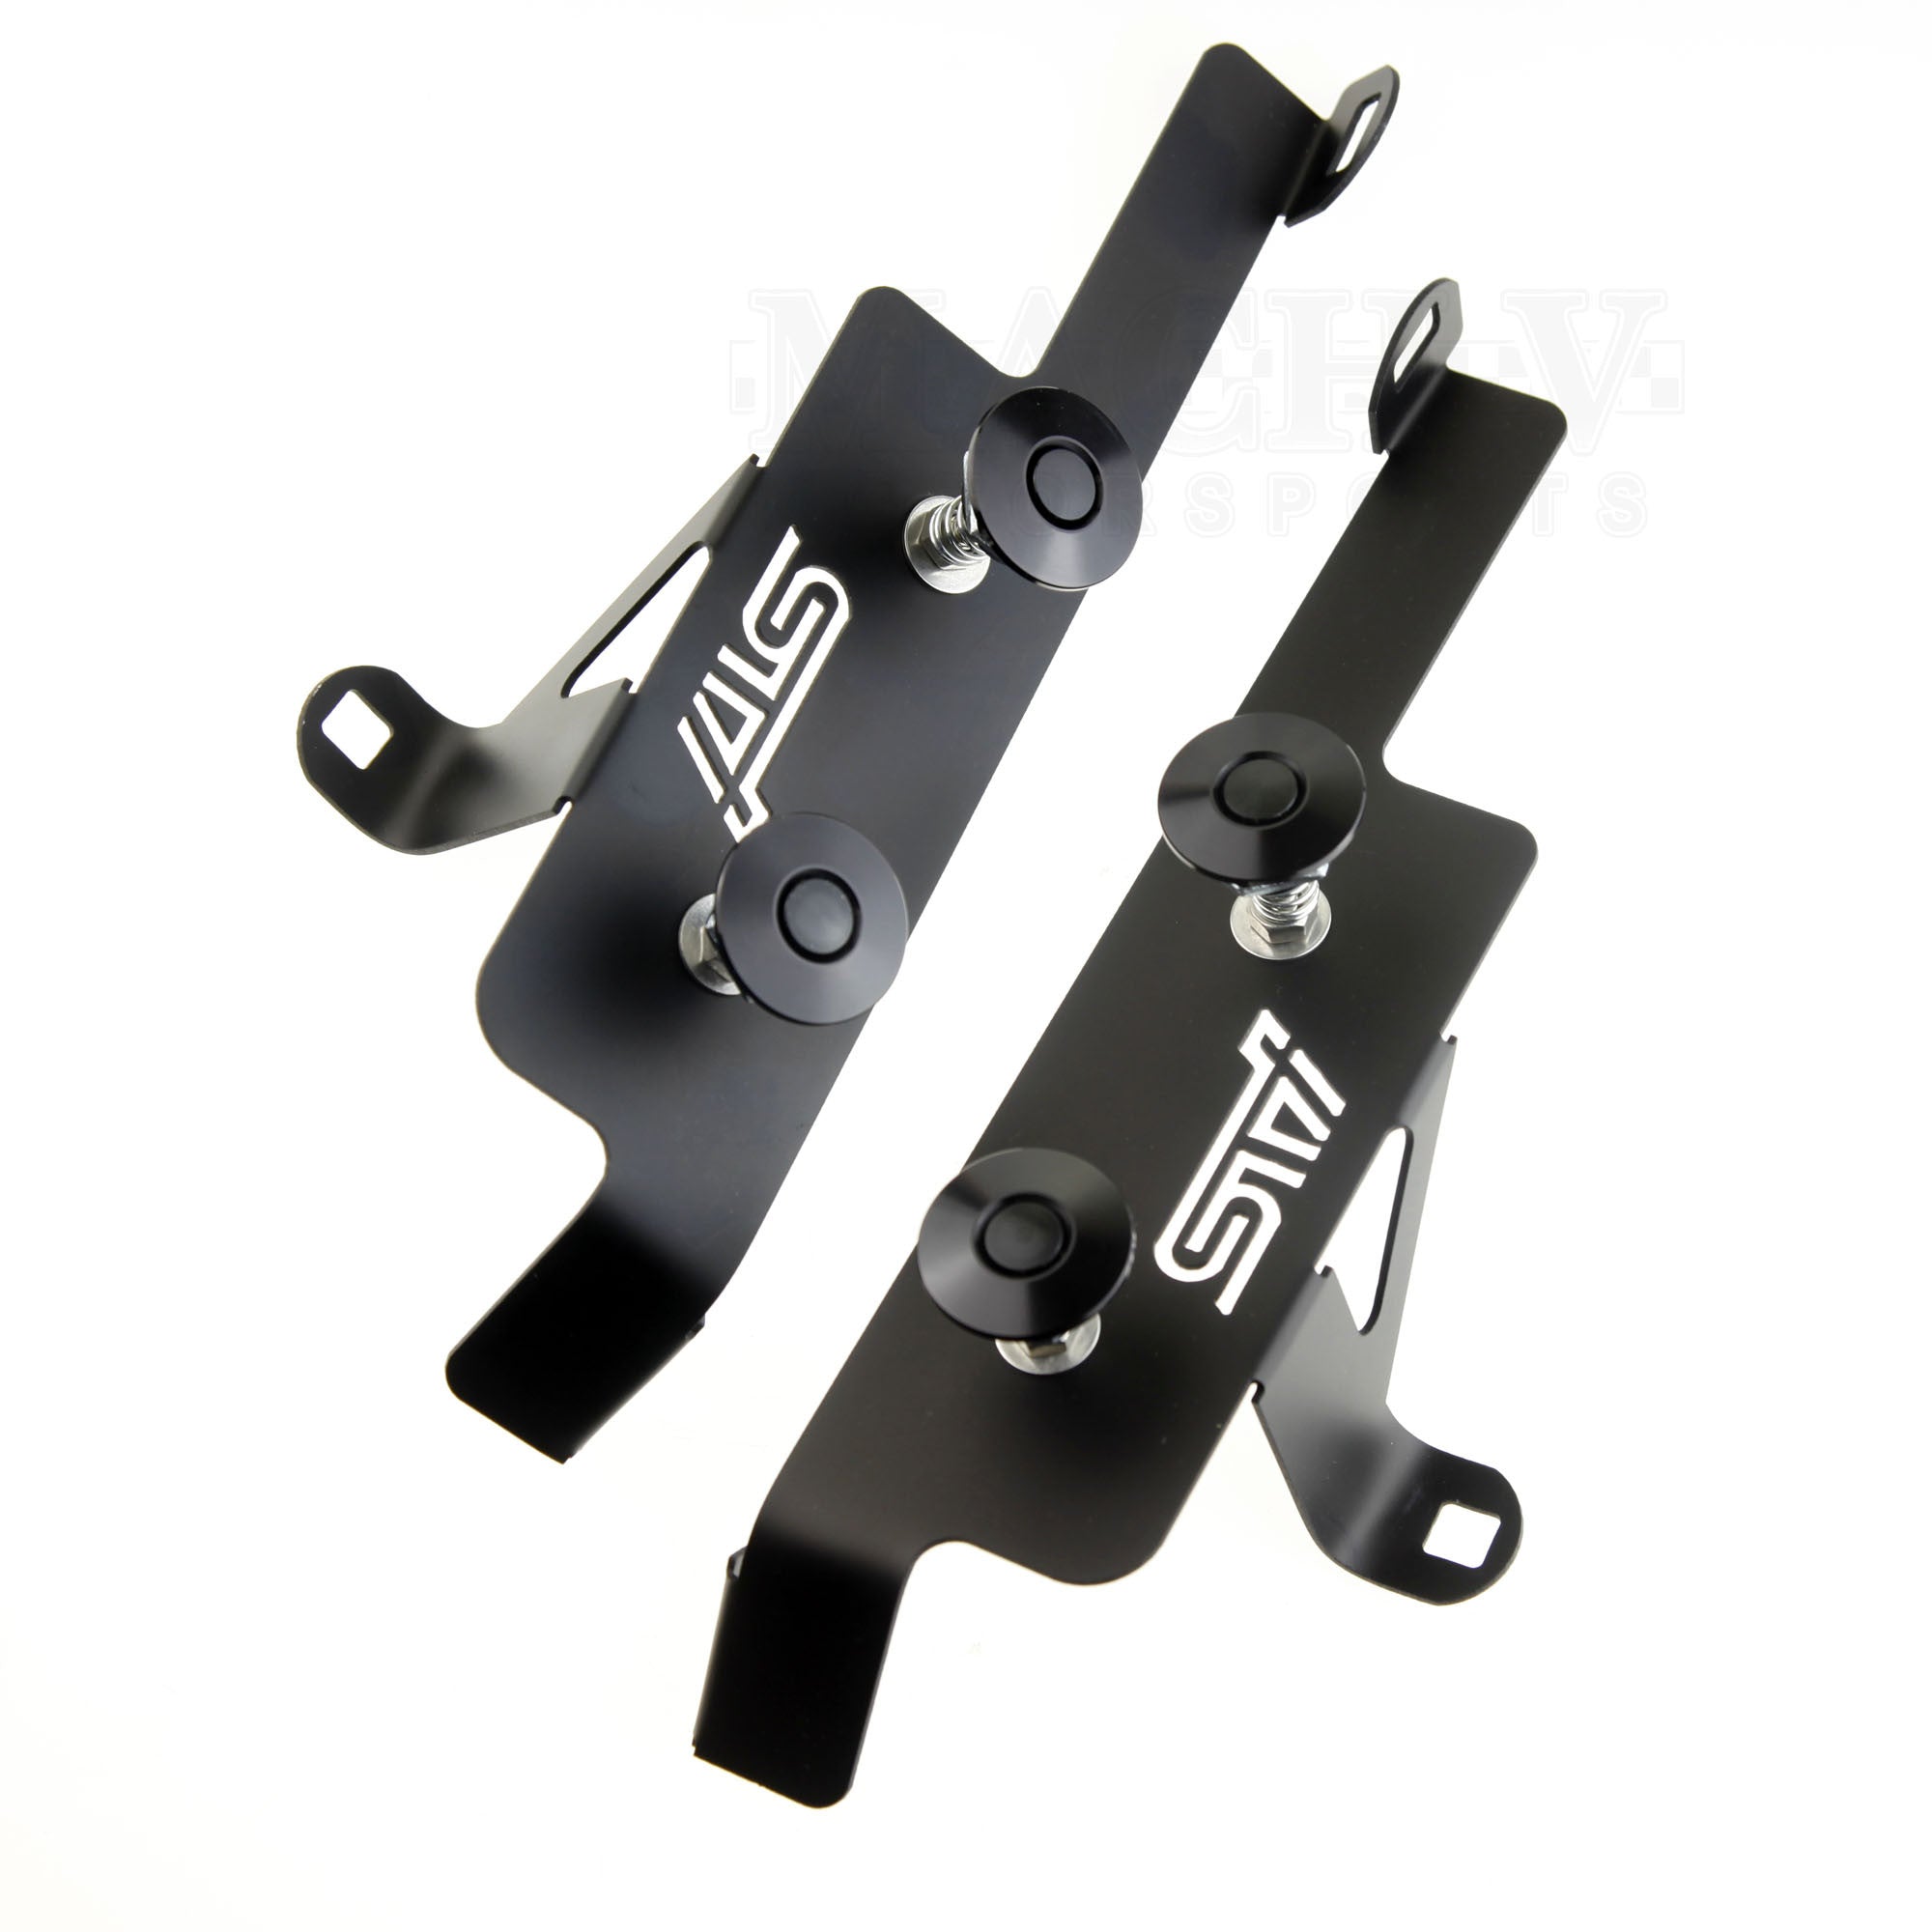 Move Over Racing Quick-Release Bumper Kit 2011-2014 WRX/2008-2014